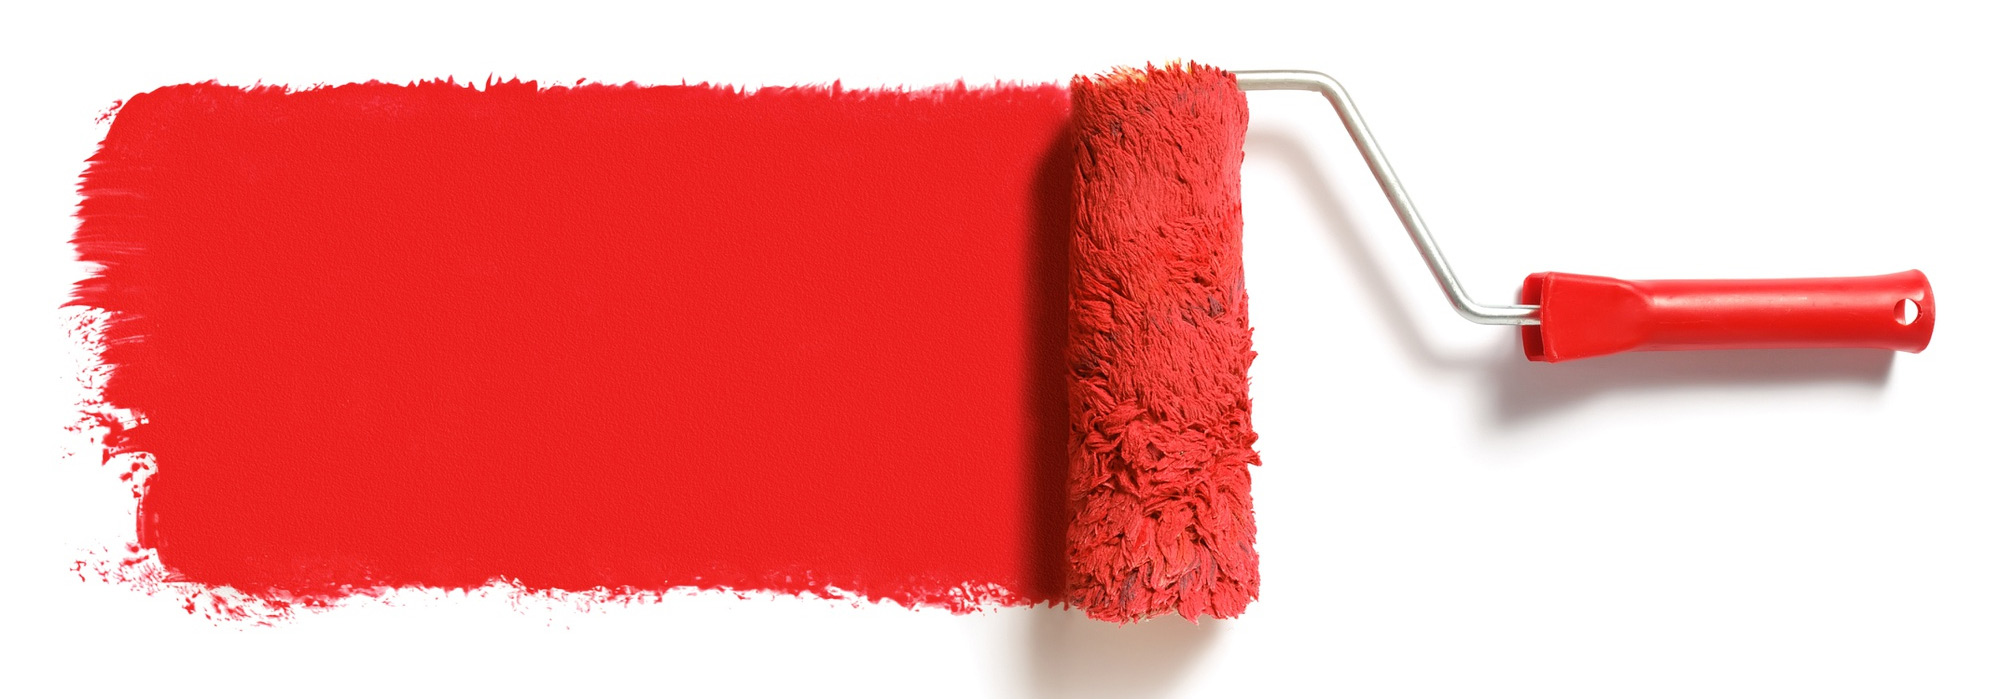 roller-brush-with-red-paint-isolated